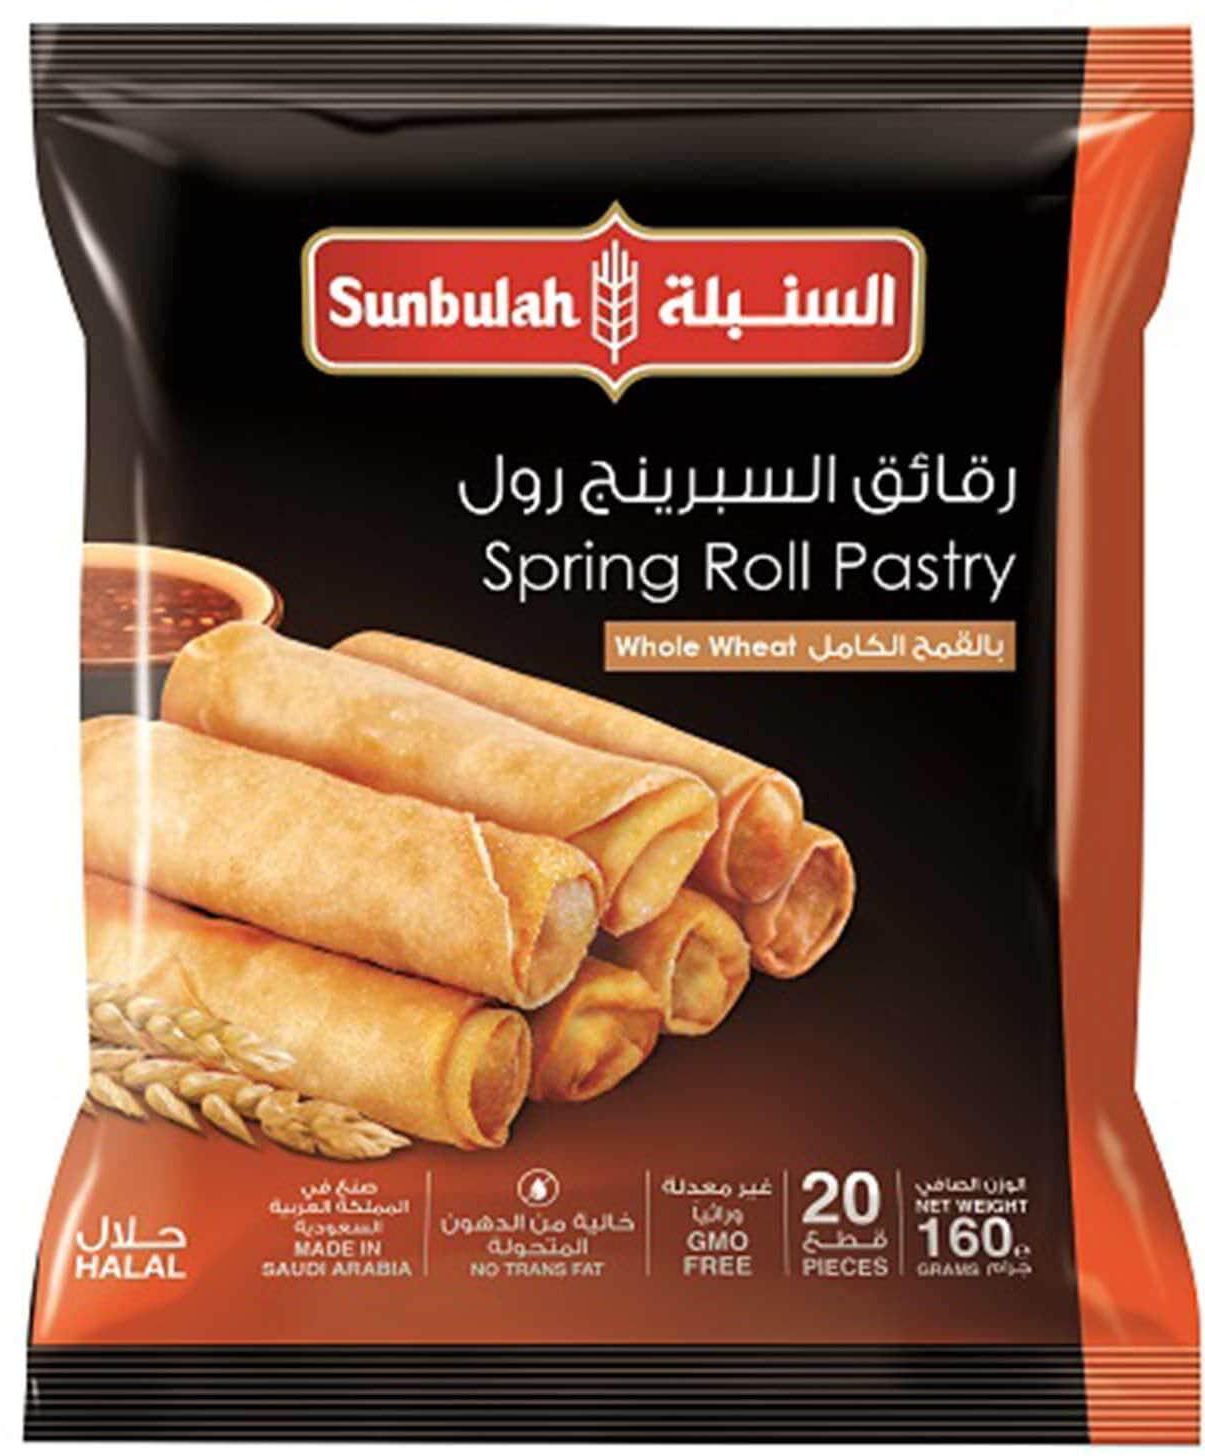 Sunbulah whole wheat spring roll pastry 160 g x 20 pieces